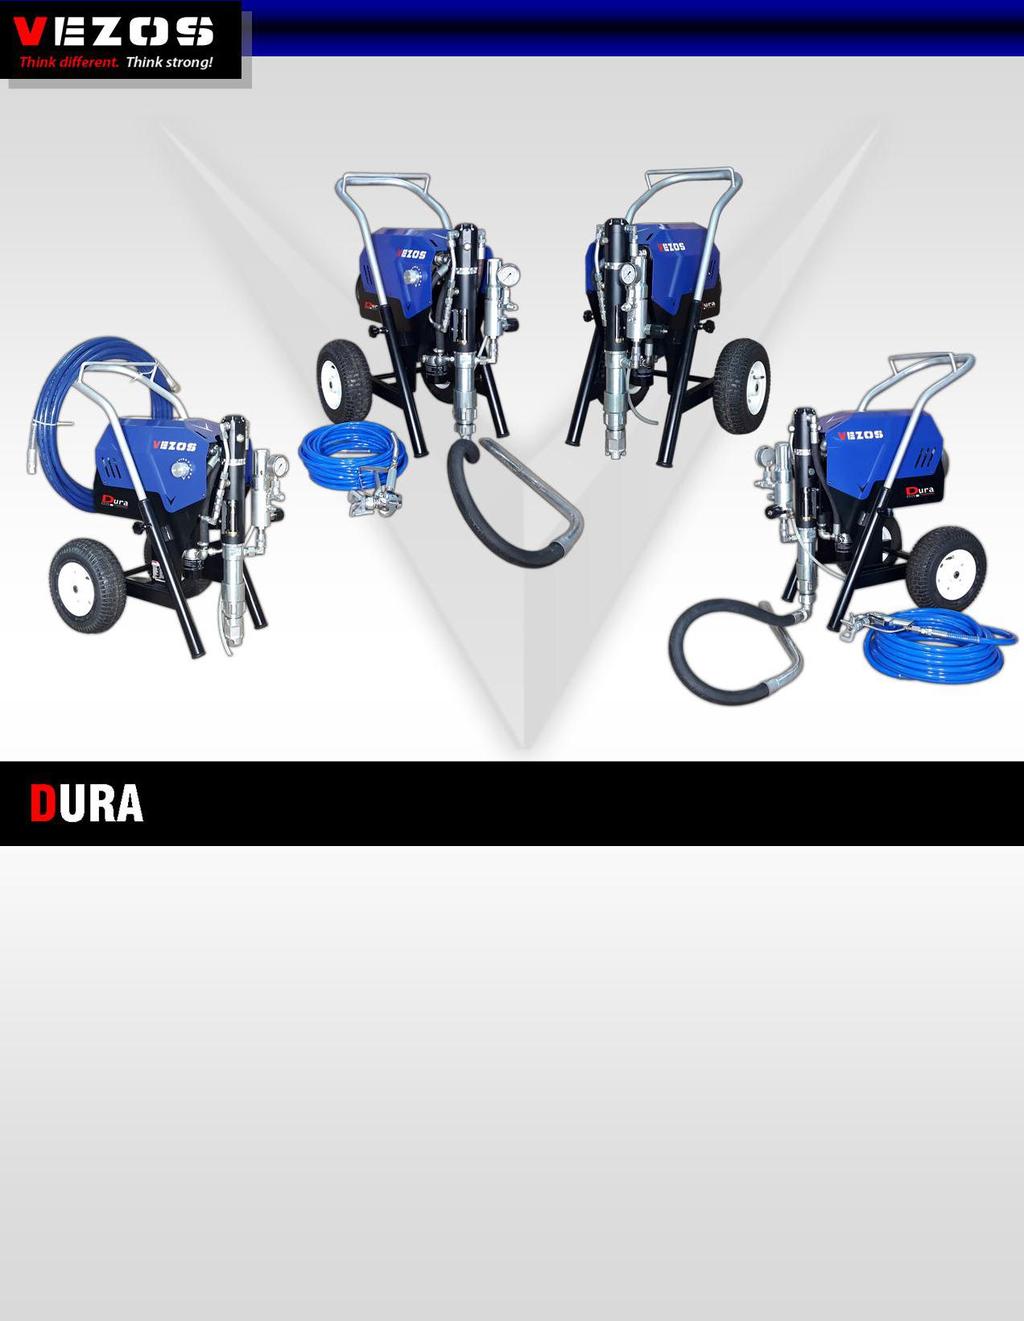 - Medium size contractors first hydraulic sprayer - DURA range of airless spraying equipment, matches up reliability & productivity for medium to large size contracting projects.